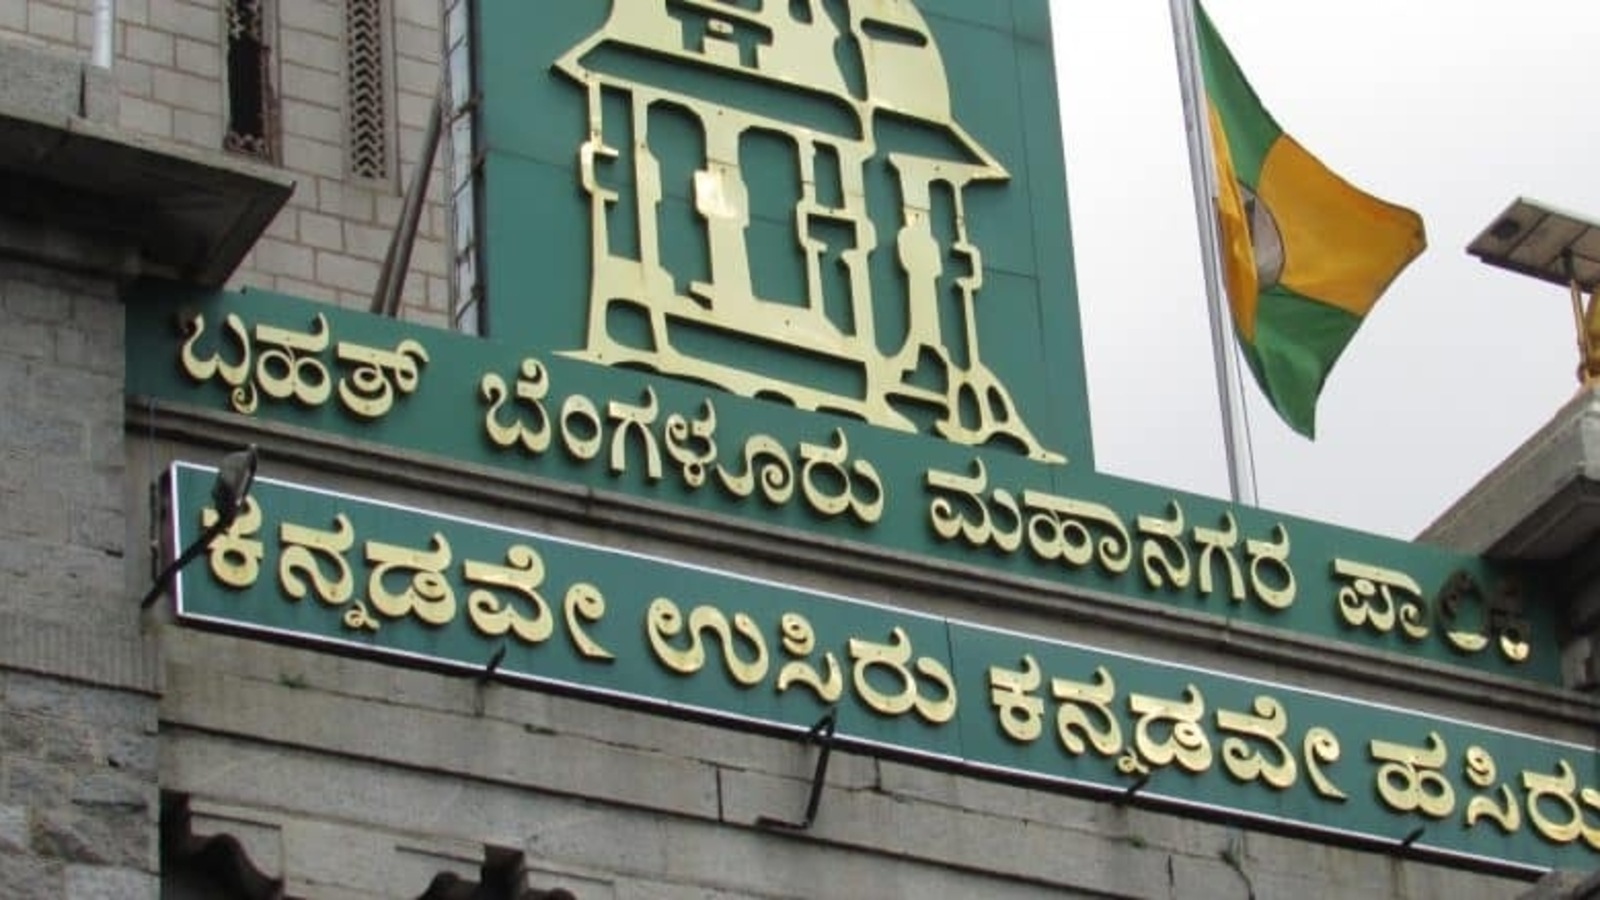 5-rebate-for-full-payment-of-property-tax-bbmp-extends-deadline-to-may-31-bengaluru